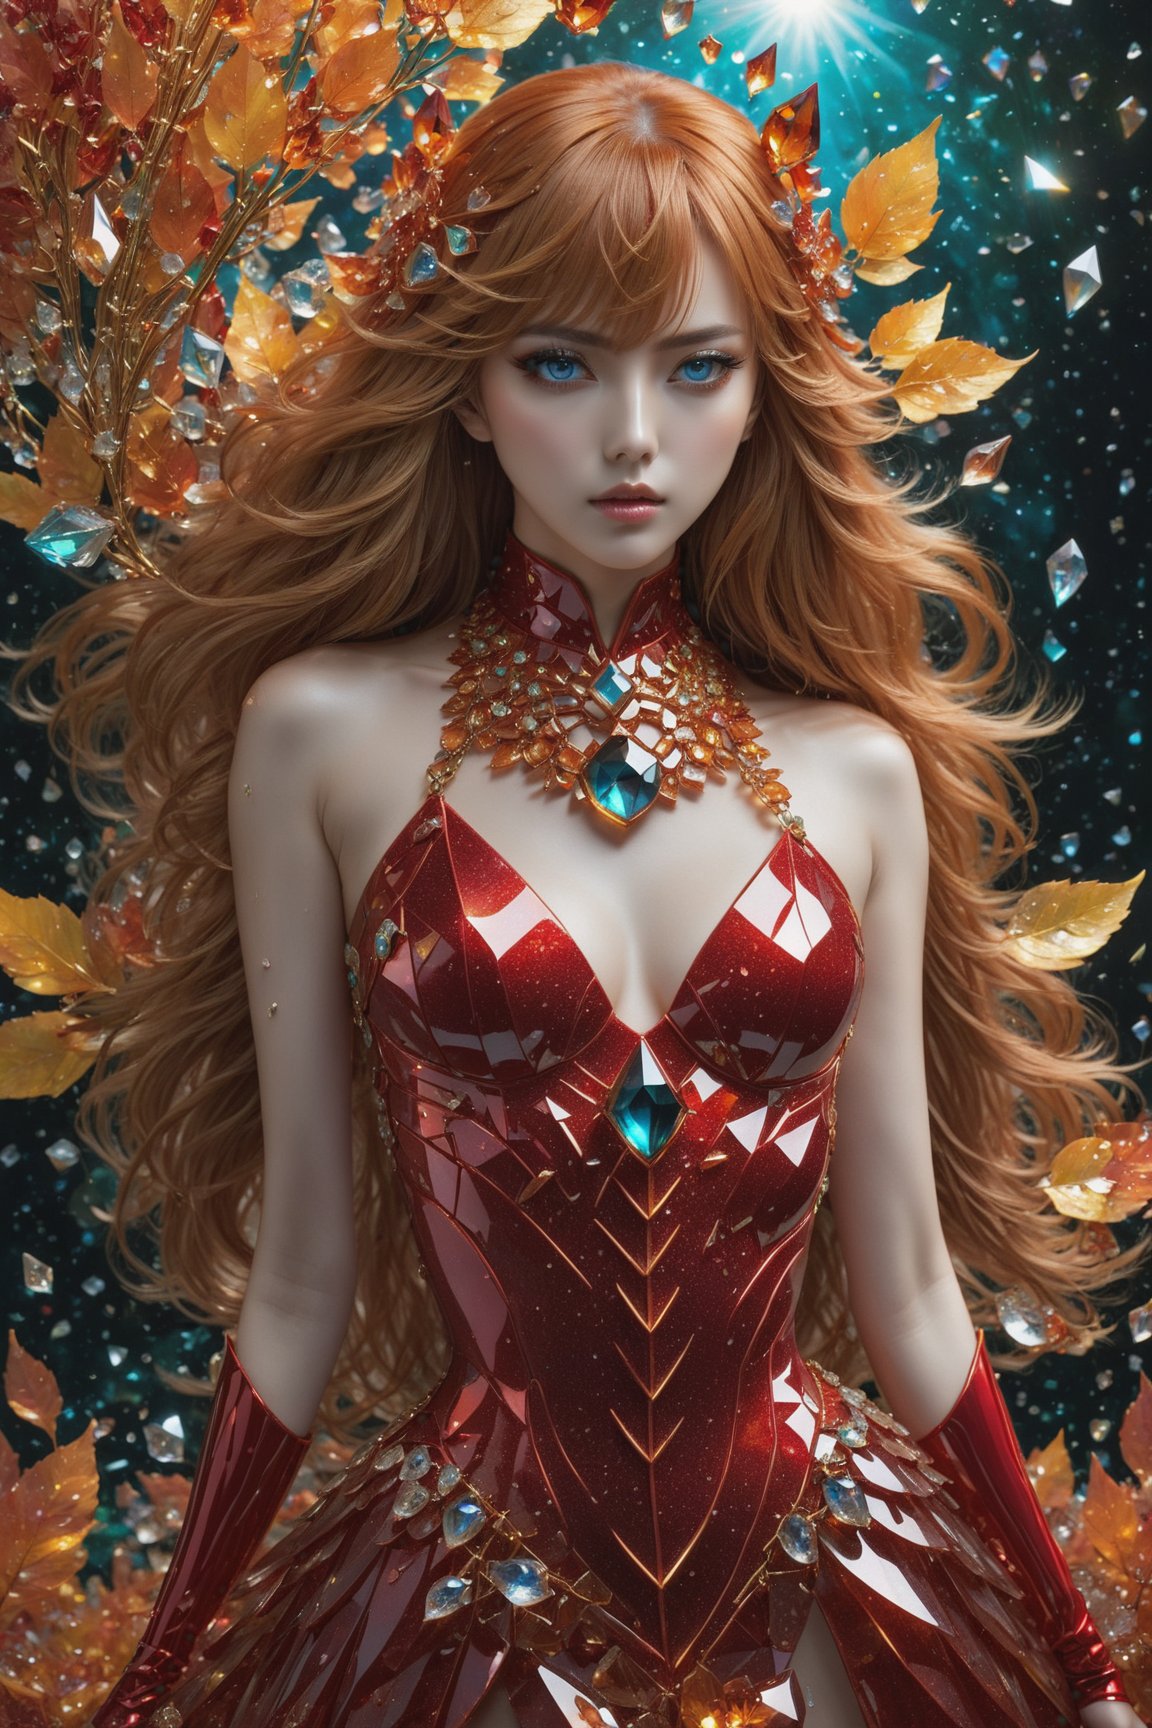 Asuka Langley Soryu adorned in a dazzling fantasy-inspired glass fantasy asymmetric dress, includes an eye-covering mask, perfect skin, Broken Glass effect, no background, stunning, something that even doesn't exist, eyes shoot,oil paint, crystal_clear, crystals made out of leaves, skpleonardostyle,